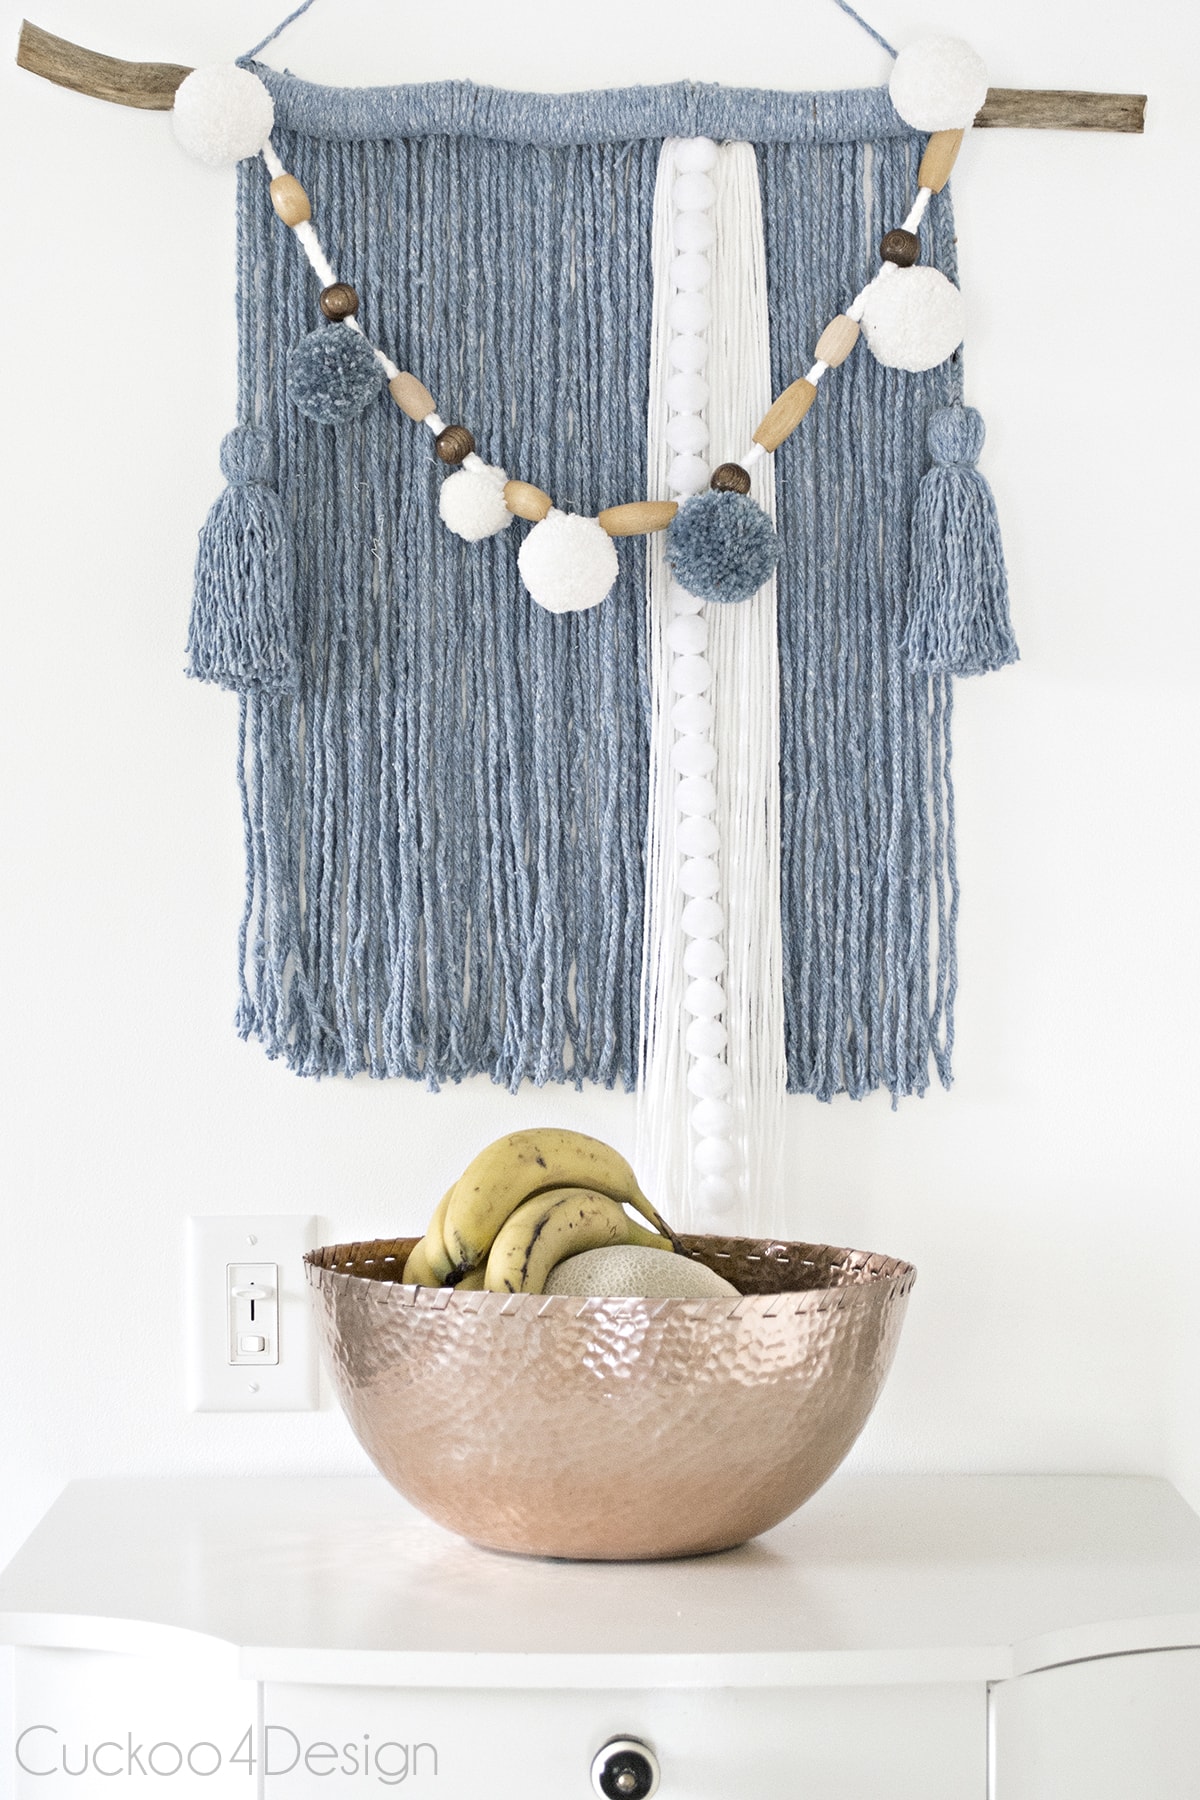 mop head yarn wall hanging with beads and pom poms